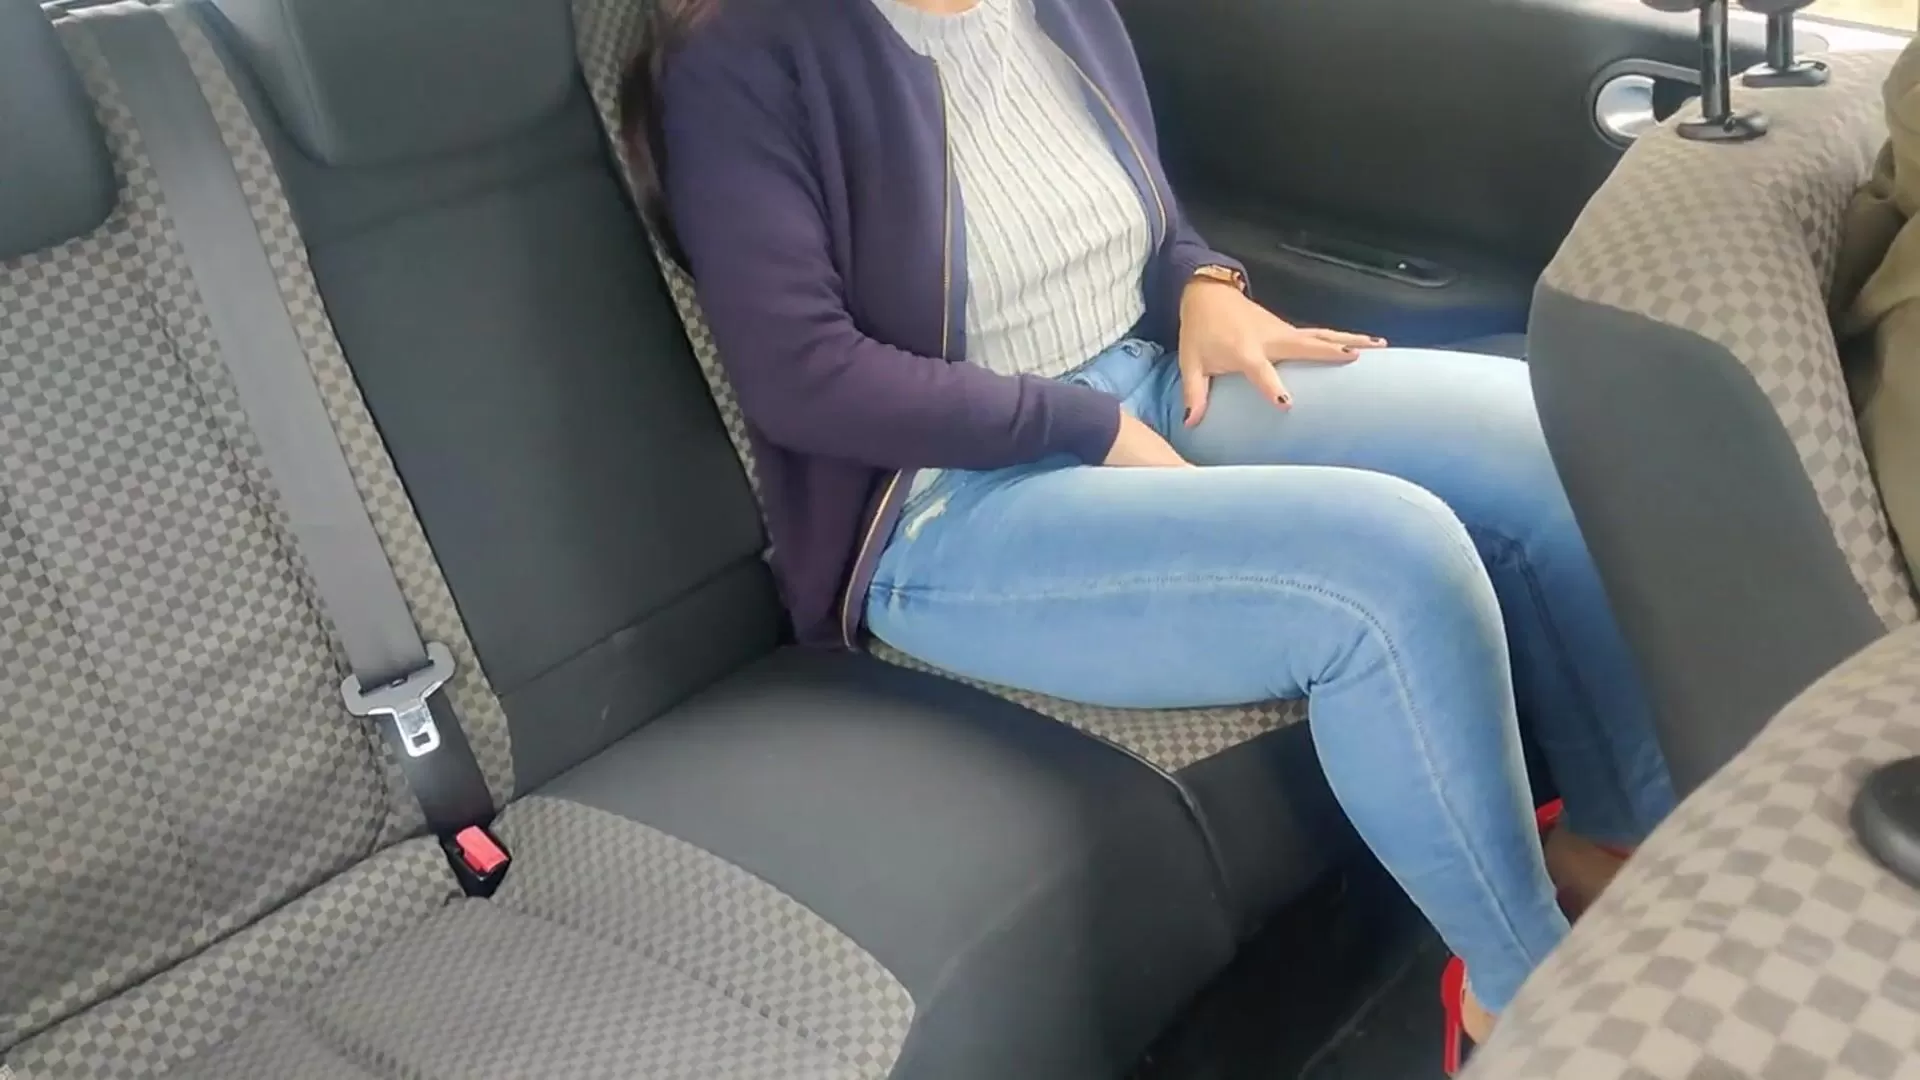 Busy worker in red heels masturbates her pussy and ass in a car taxi/uber watch online pic